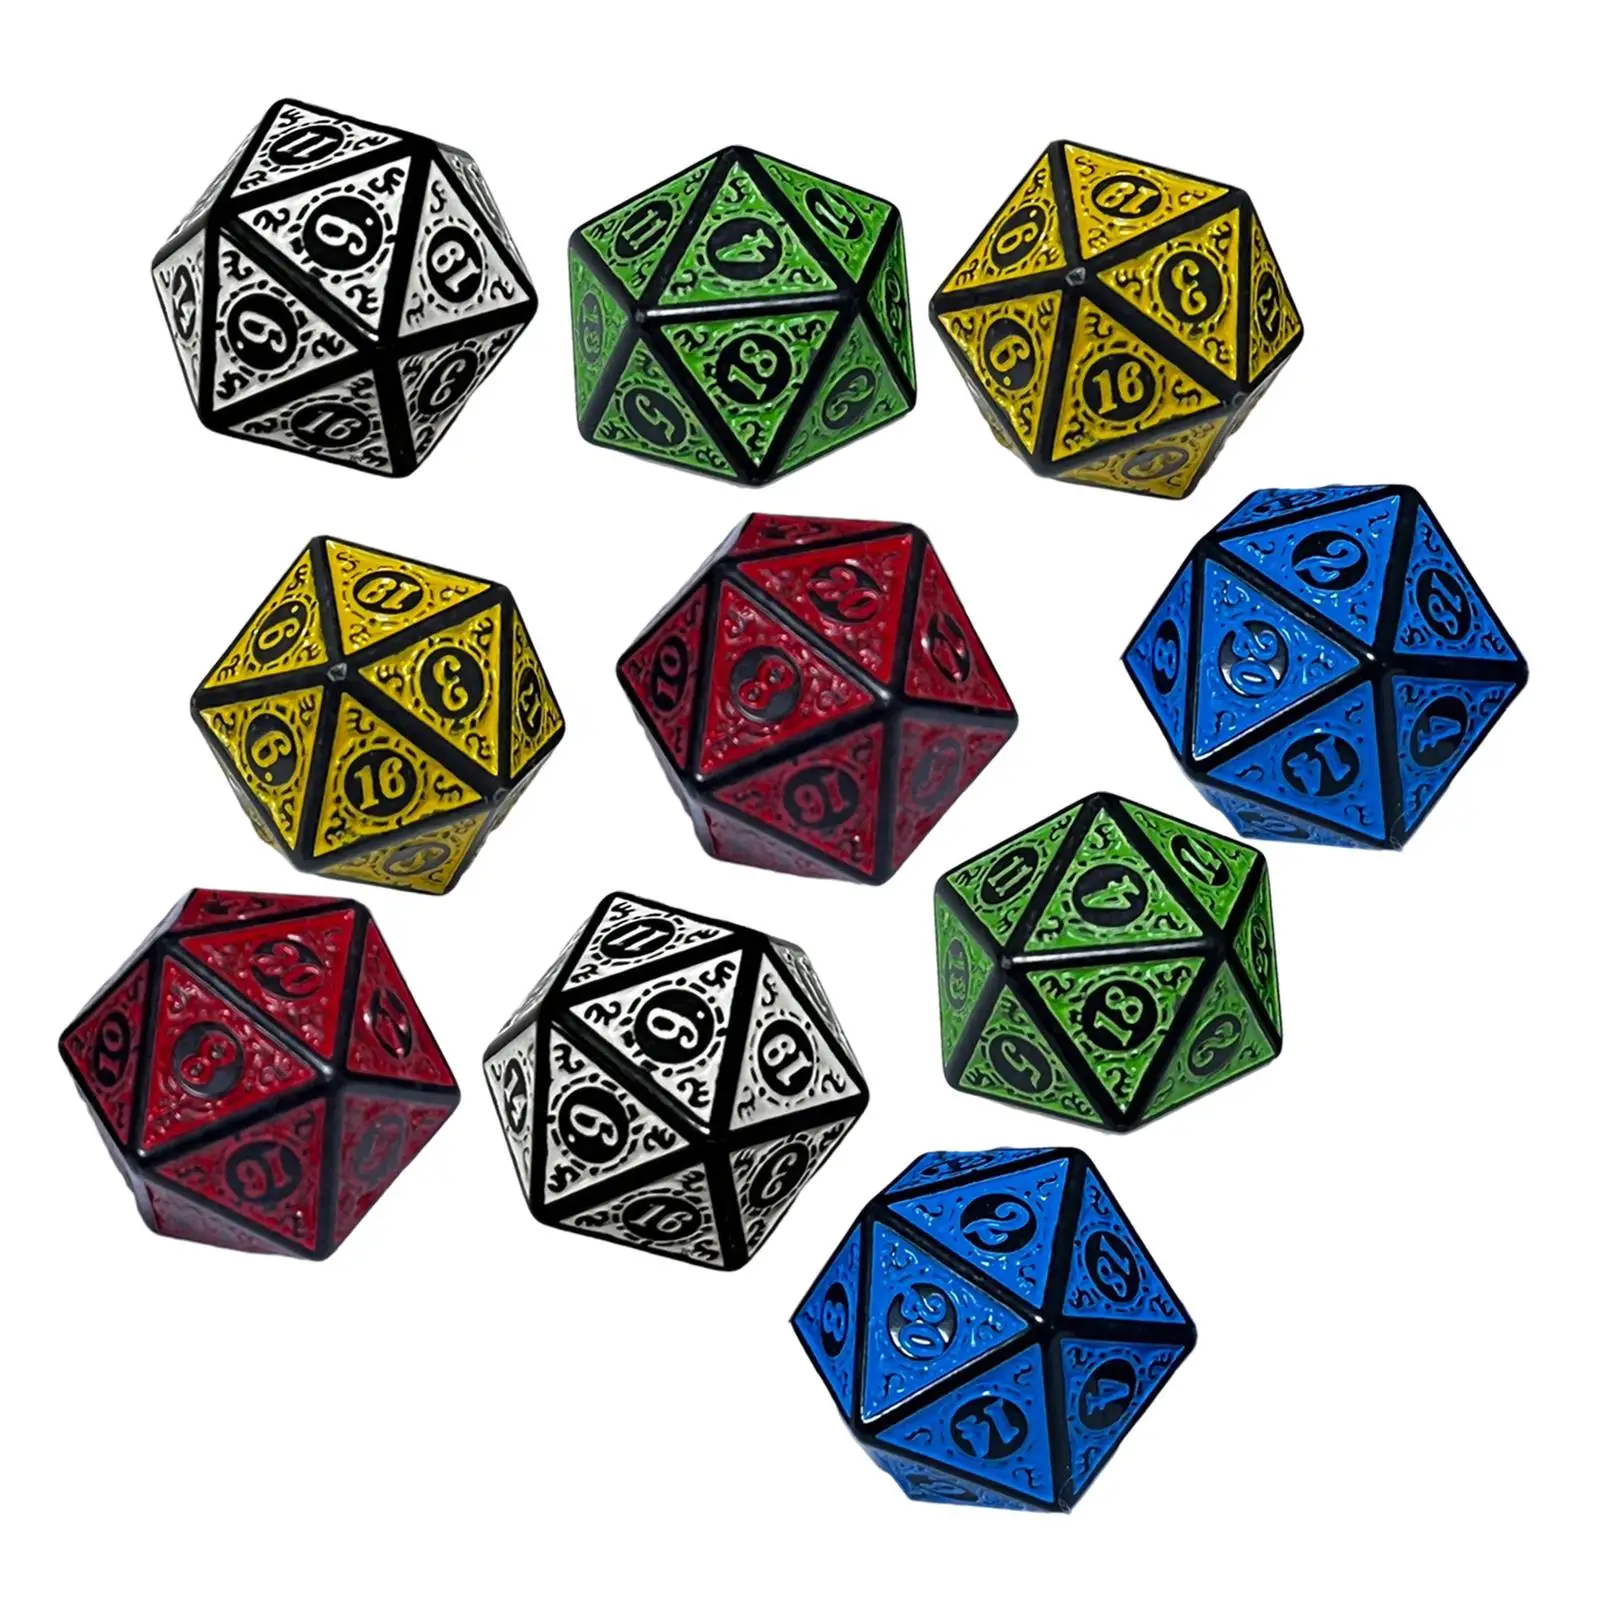 10x Astrology Dice Acrylic 20 Sided Dices Collectibles Board Game Dice Set, 2.1cm